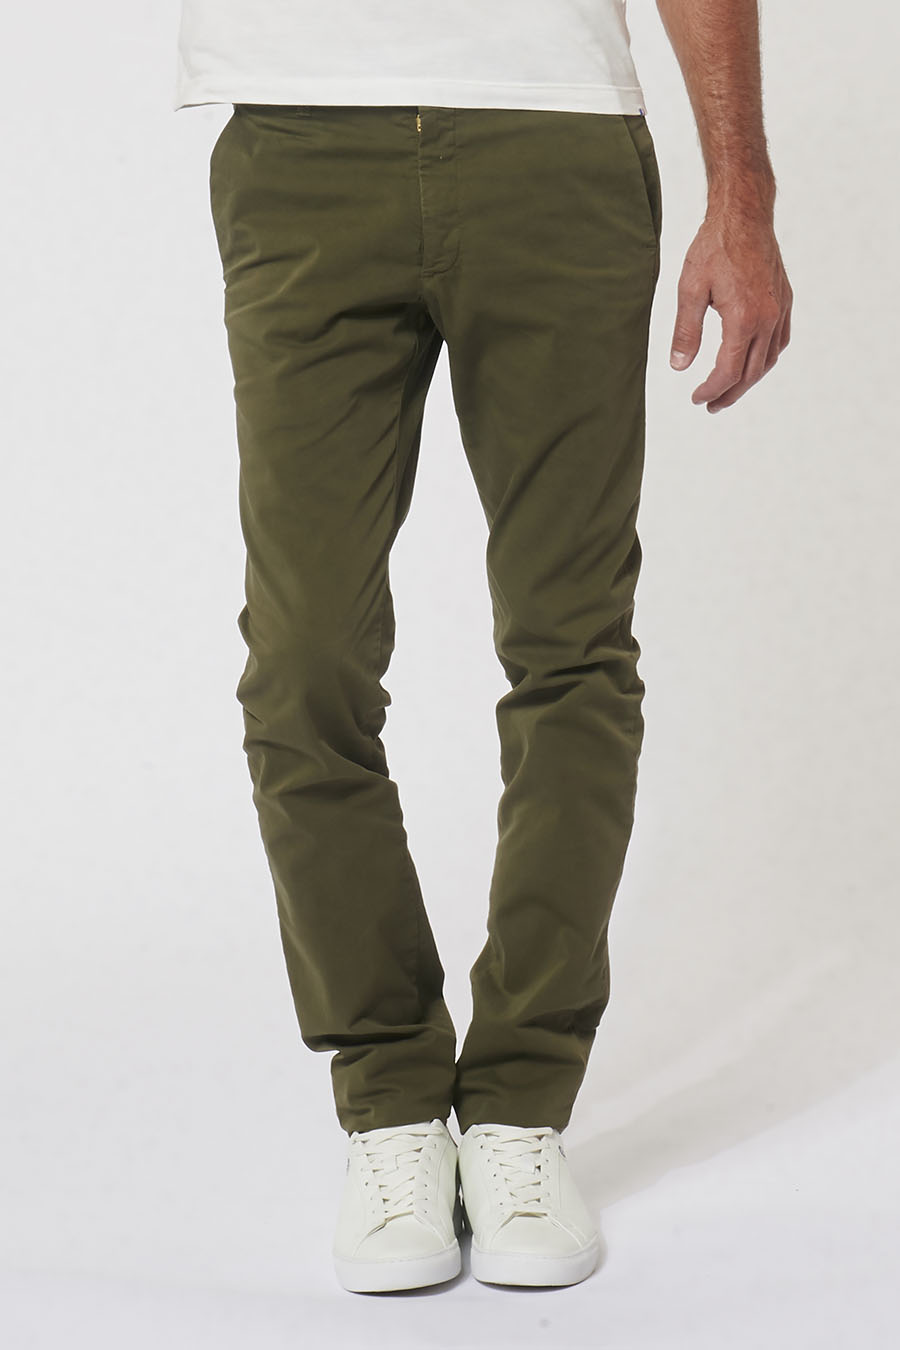 Chino Fit Leger Olive 4.jpg